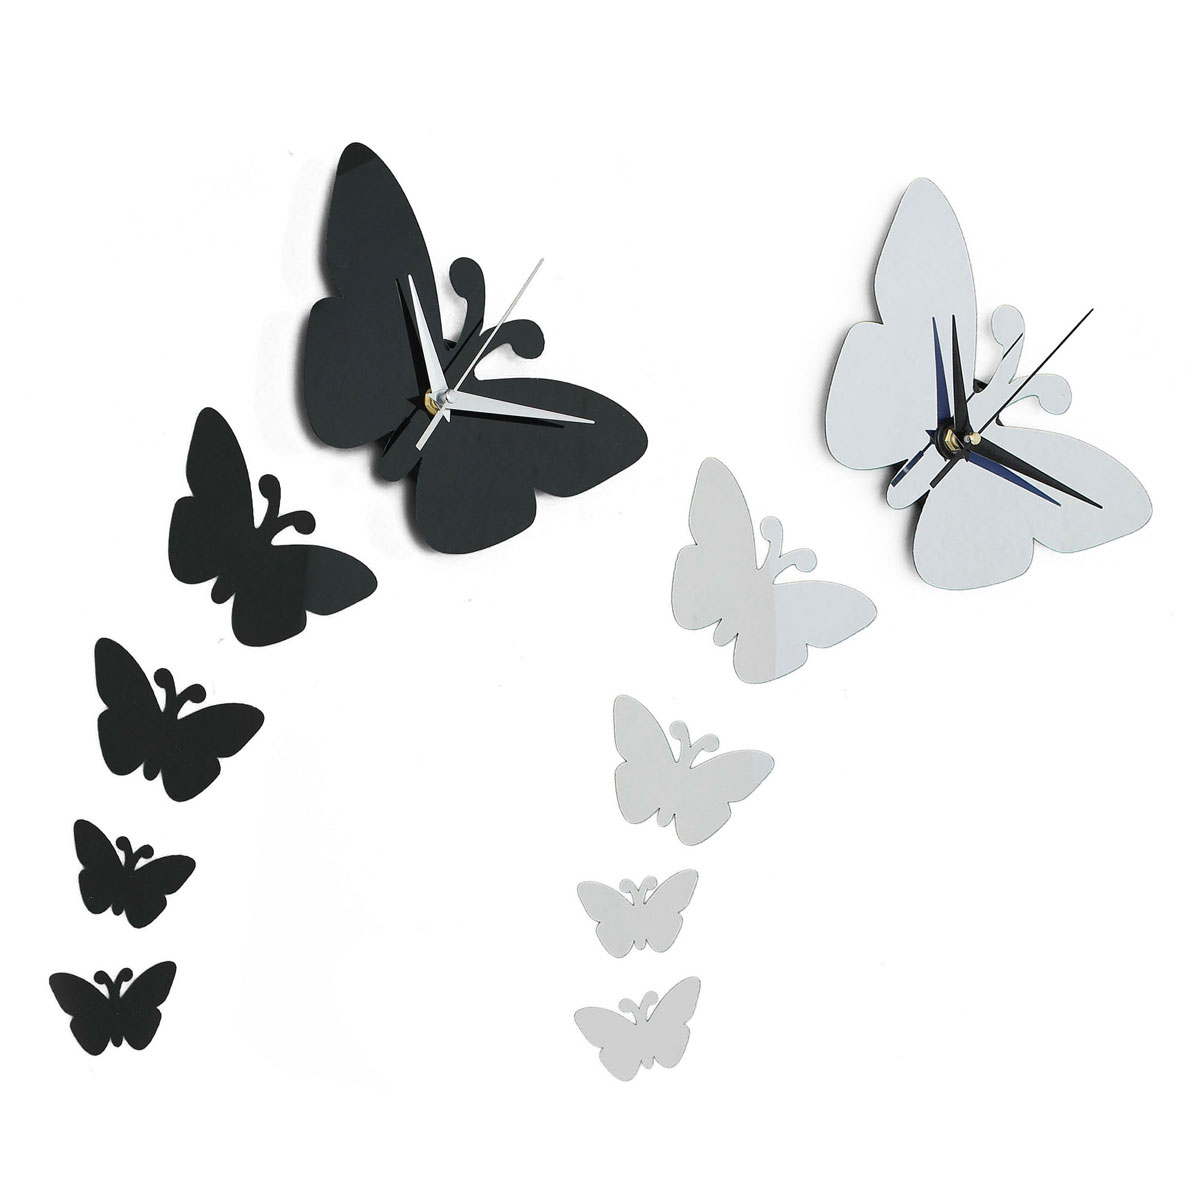 Butterfly-Wall-Clock-Sticker-Specular-Surface-Wall-Sticker-Home-Decoration-1082153-1